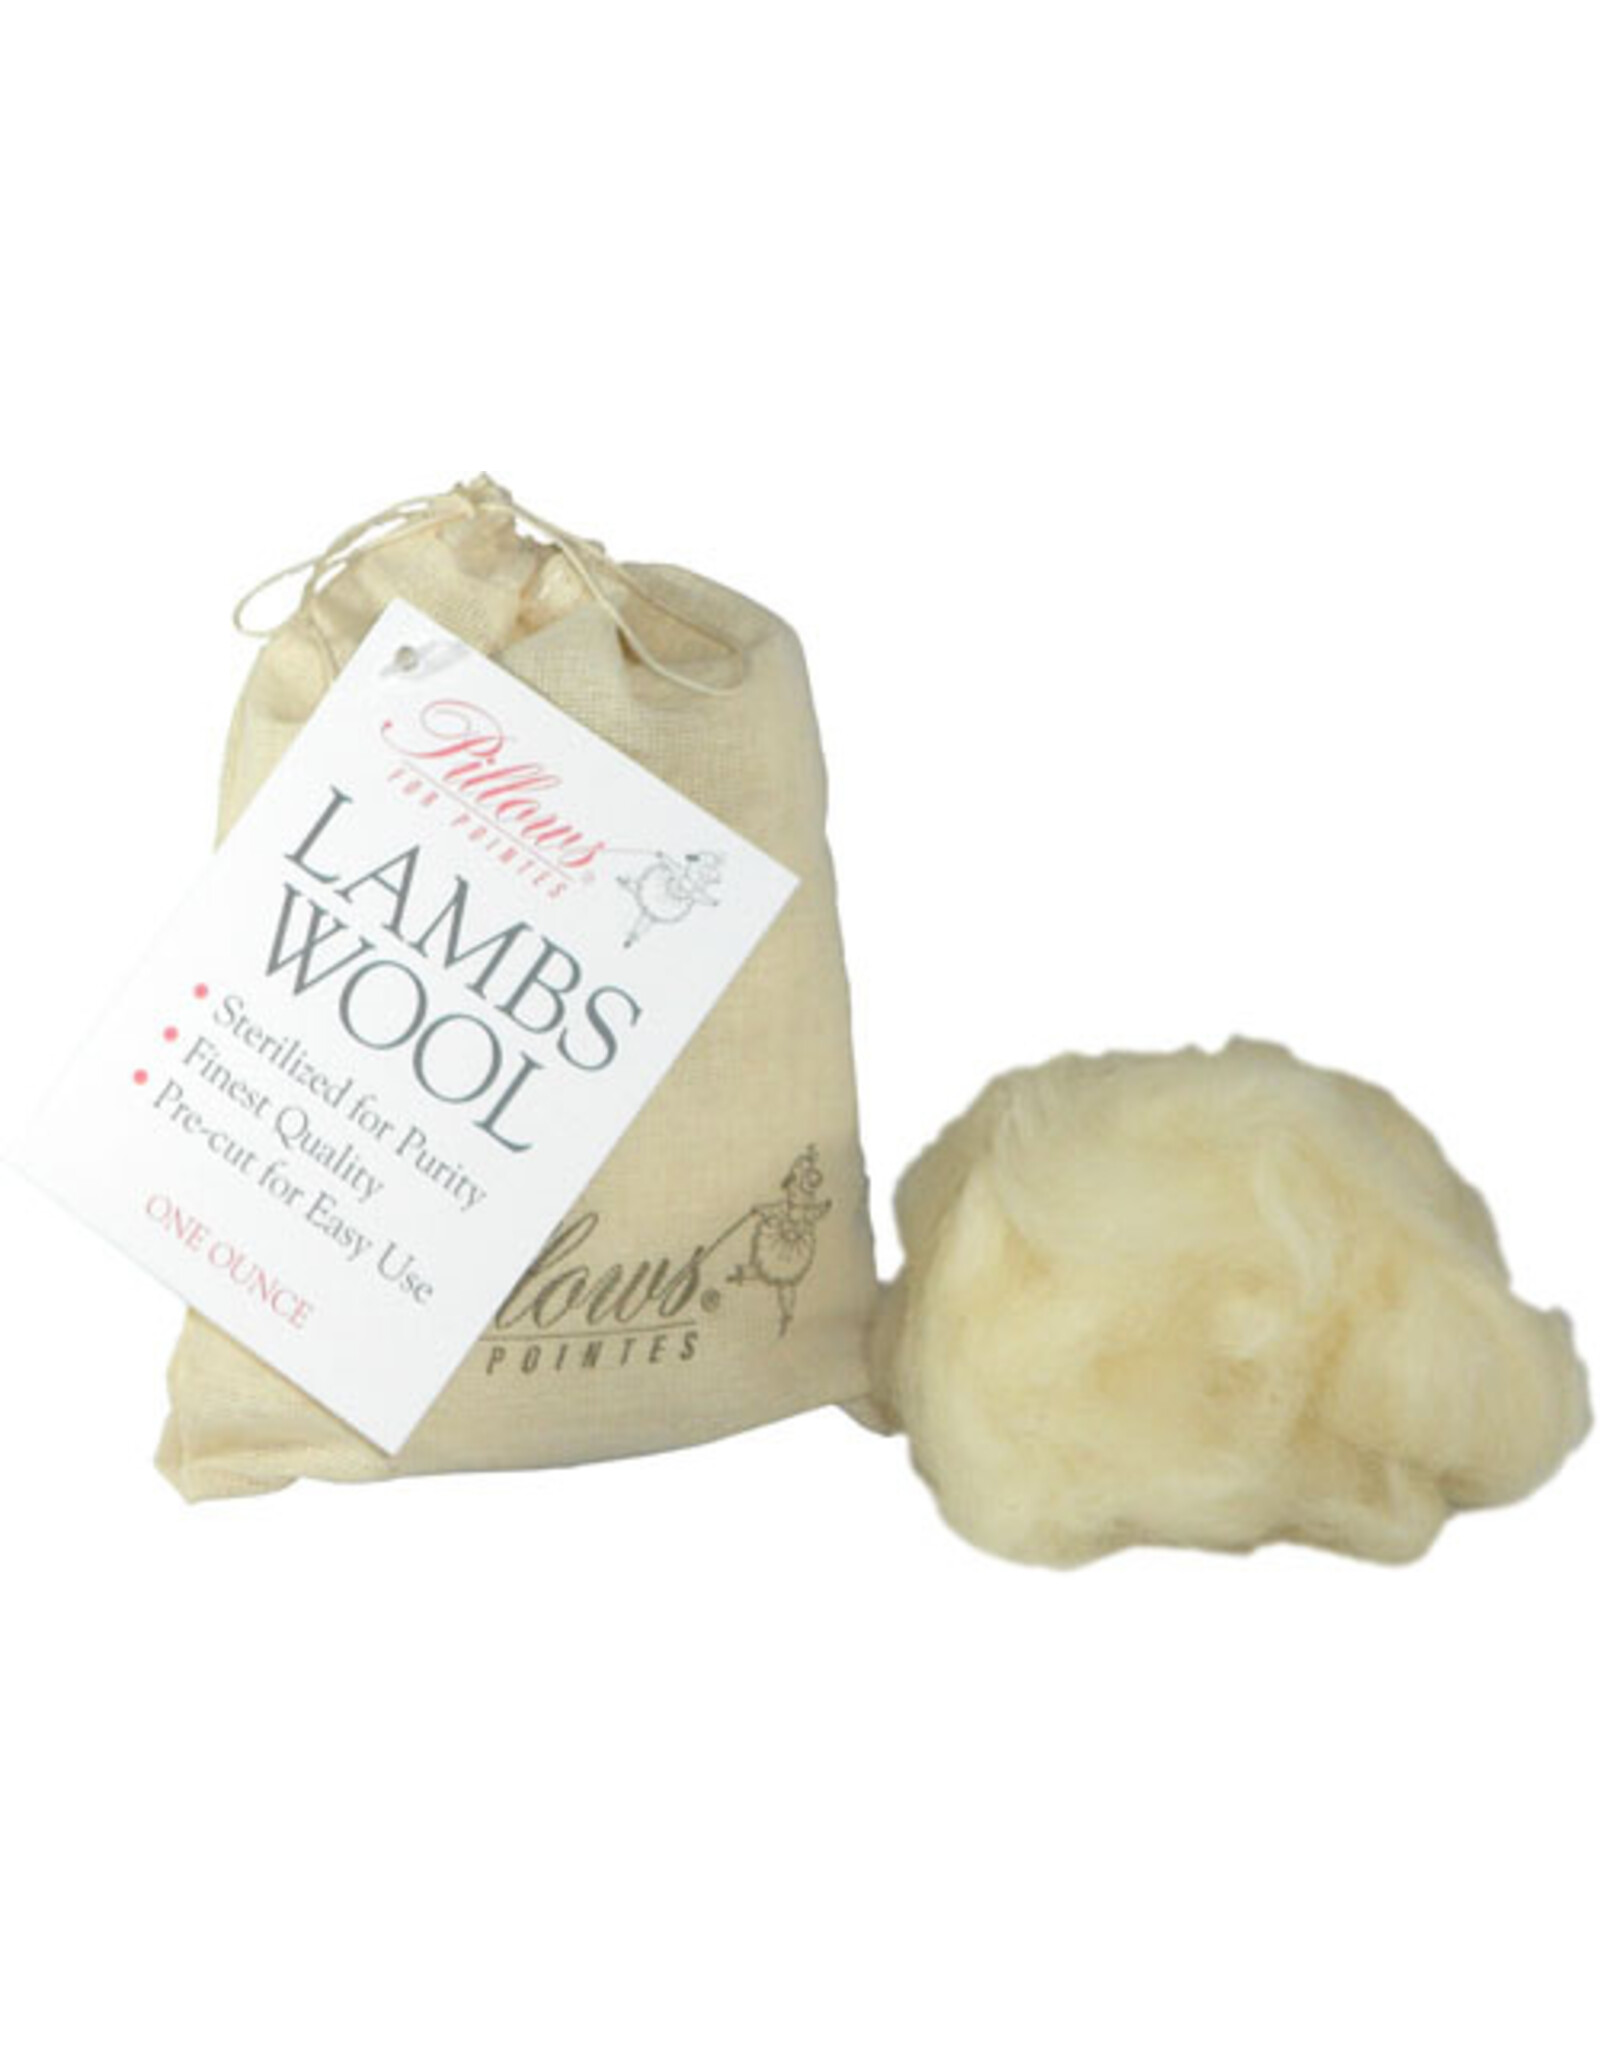 Pillows for Pointes Loose Lambs Wool (LLW)